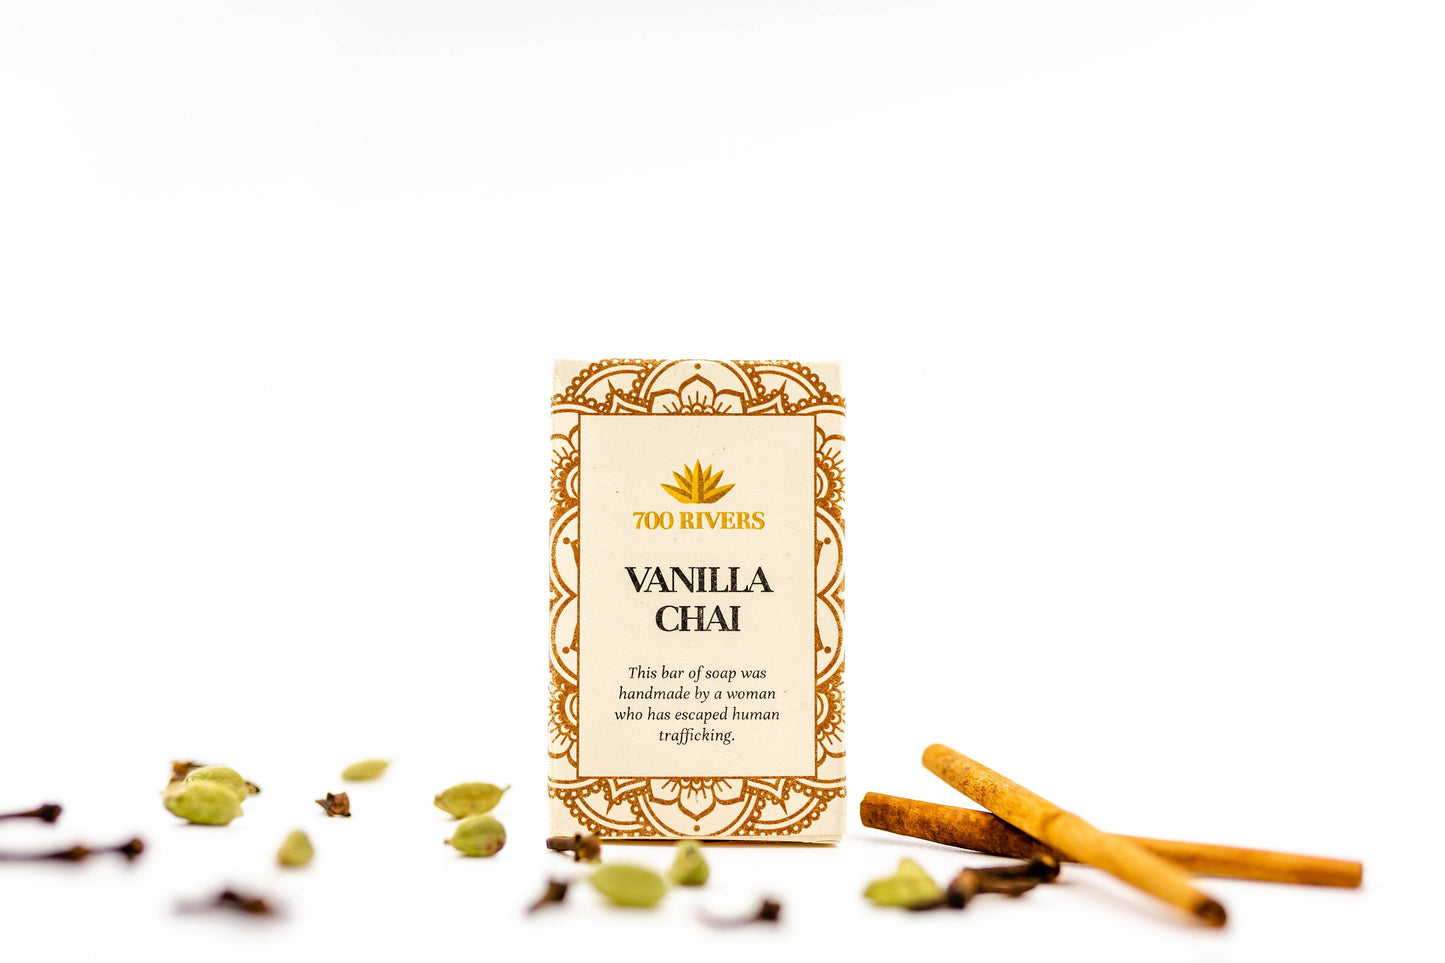 700 Rivers - Vanilla Chai Soap Bar - Crafted by artisans that escaped human trafficking  700 Rivers   -better made easy-eco-friendly-sustainable-gifting